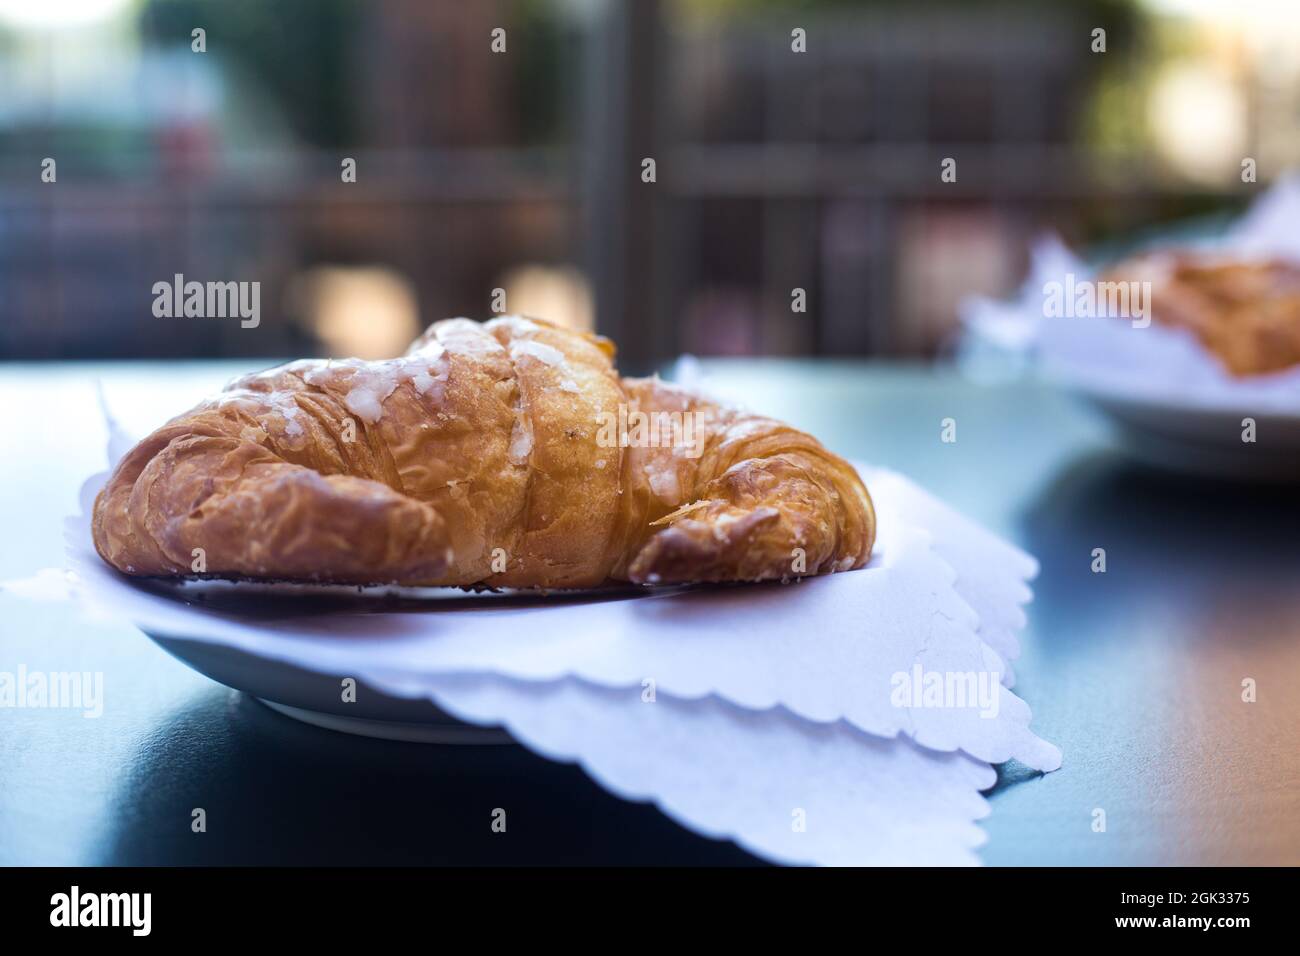 Italian breakfast. Fresh crunchy croissant or cornetto served in outdoor terrace on white napkins with view to neighbour house in background. Summer Stock Photo